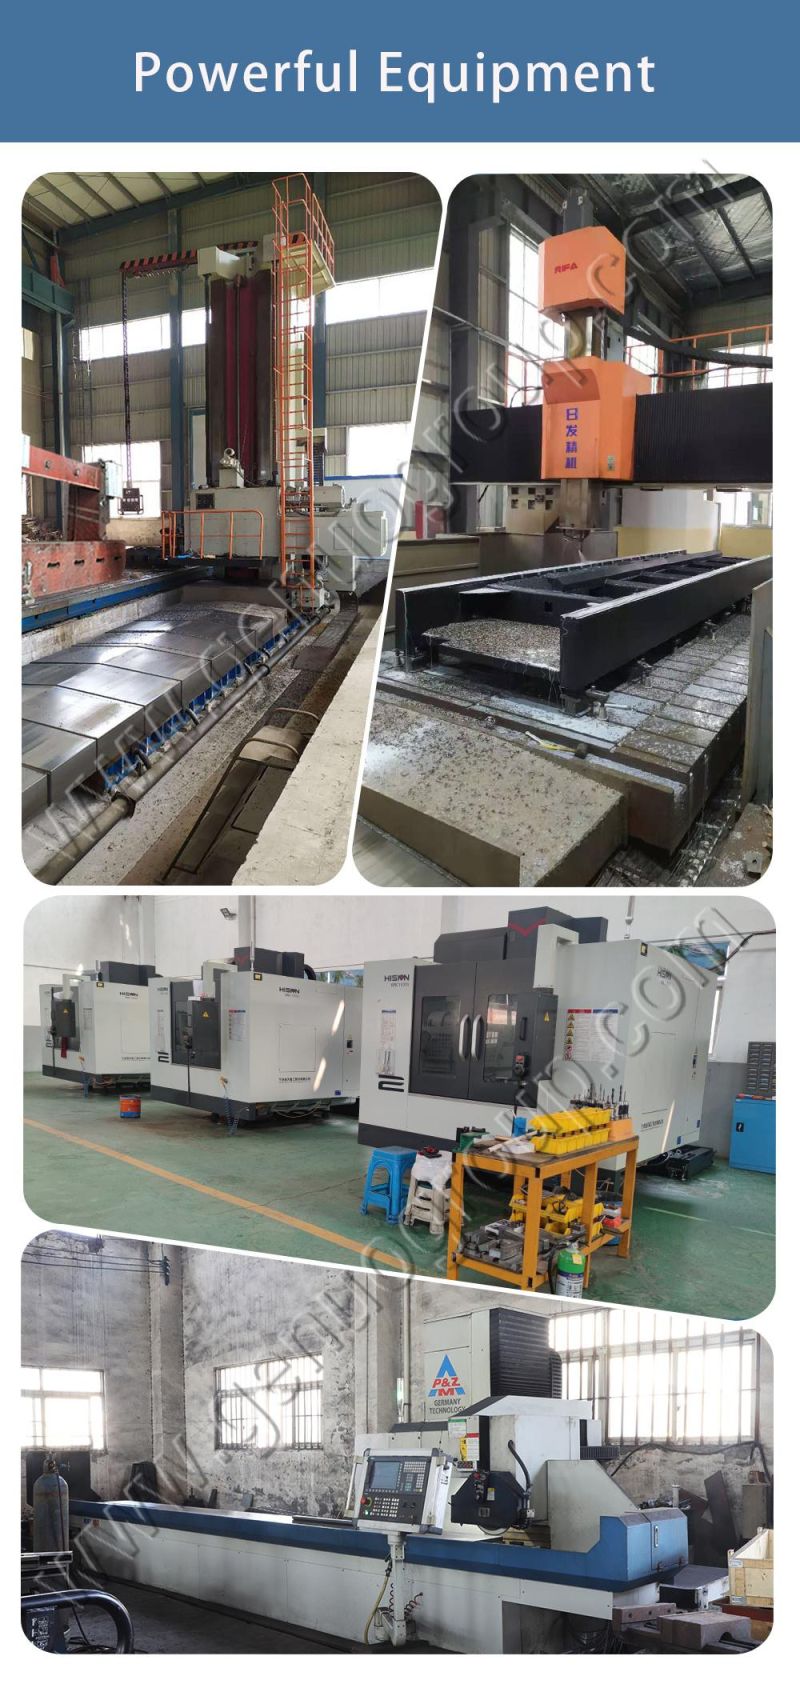 Gn 4020 LC 1000W Single Table Laser Cutting Machine